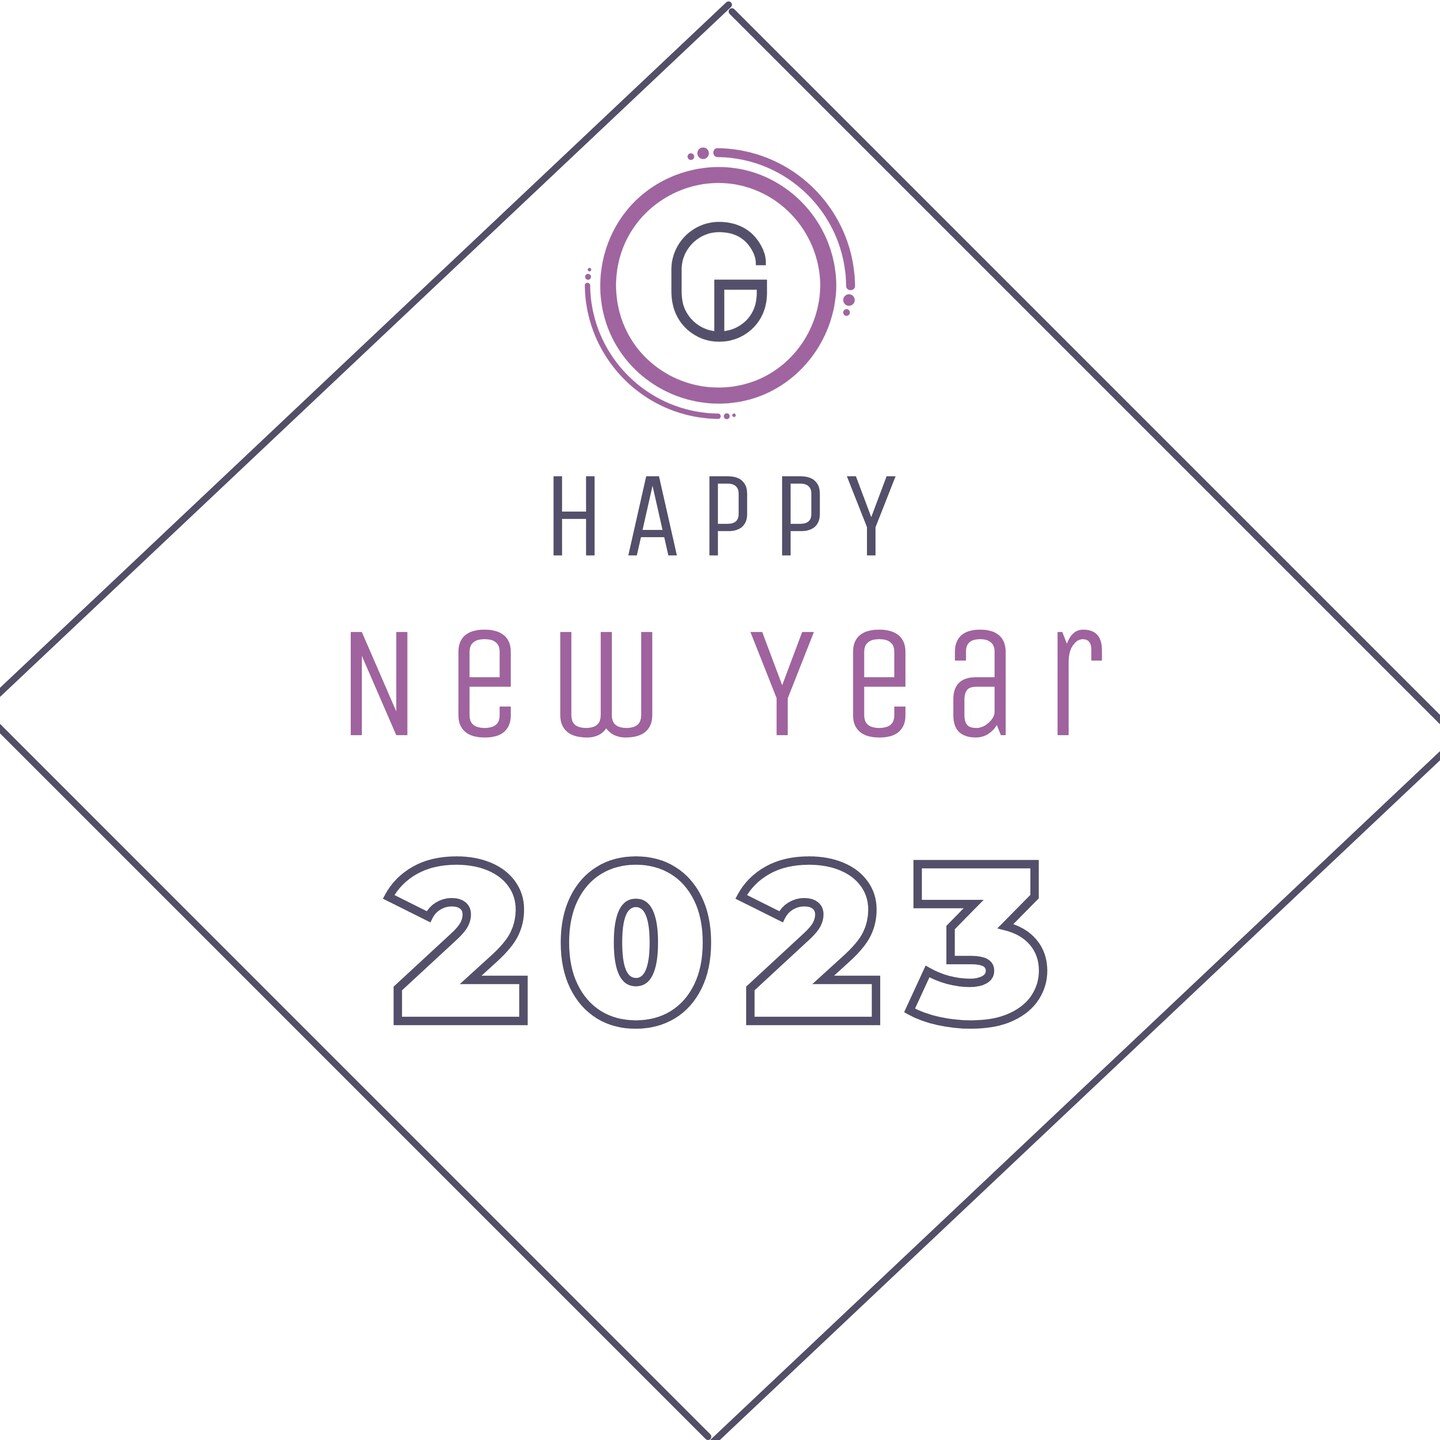 🎆Happy New Year🎆

What is your New Year's resolution?

Start exercising❓
Losing weight❓
Increasing muscle mass❓
Finding mobility❓
Improving core strength❓
Recovery and Rehabilitation❓
Discovering a healthier you ❓

Let us guide you to achieve your 